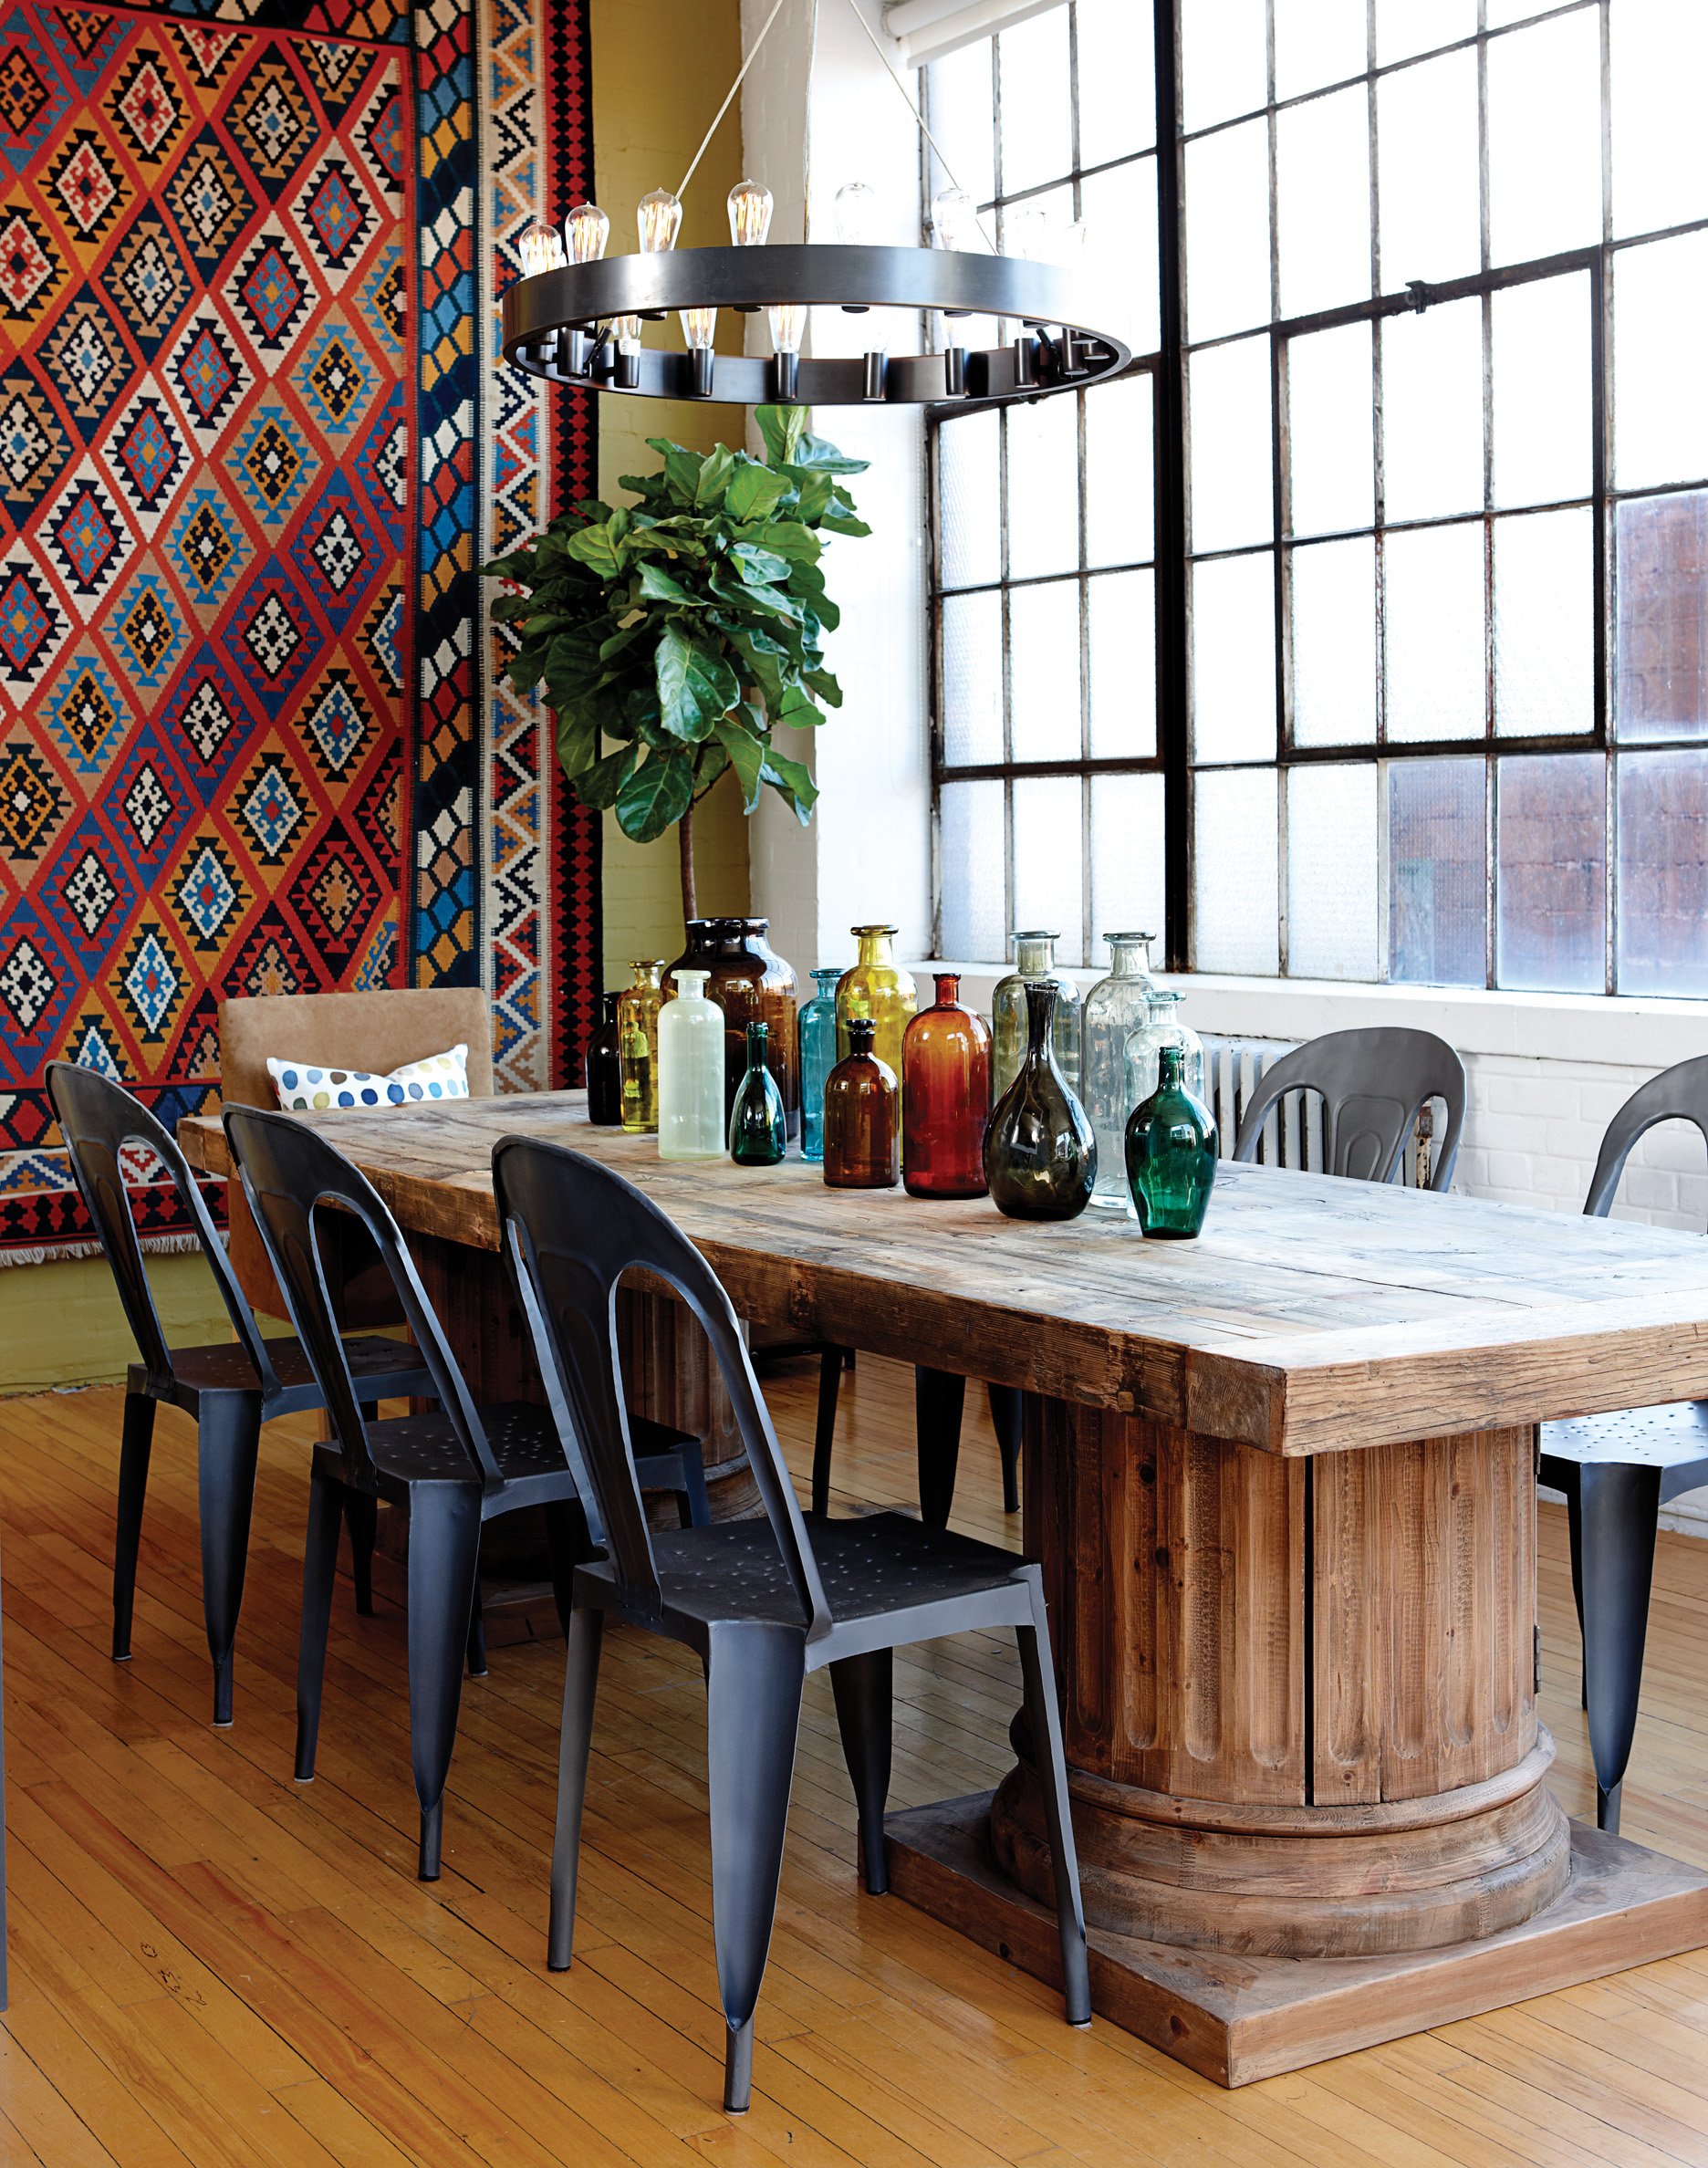 Dining room, glass bottles on table, patterned wall hanging, Jan 13, p62